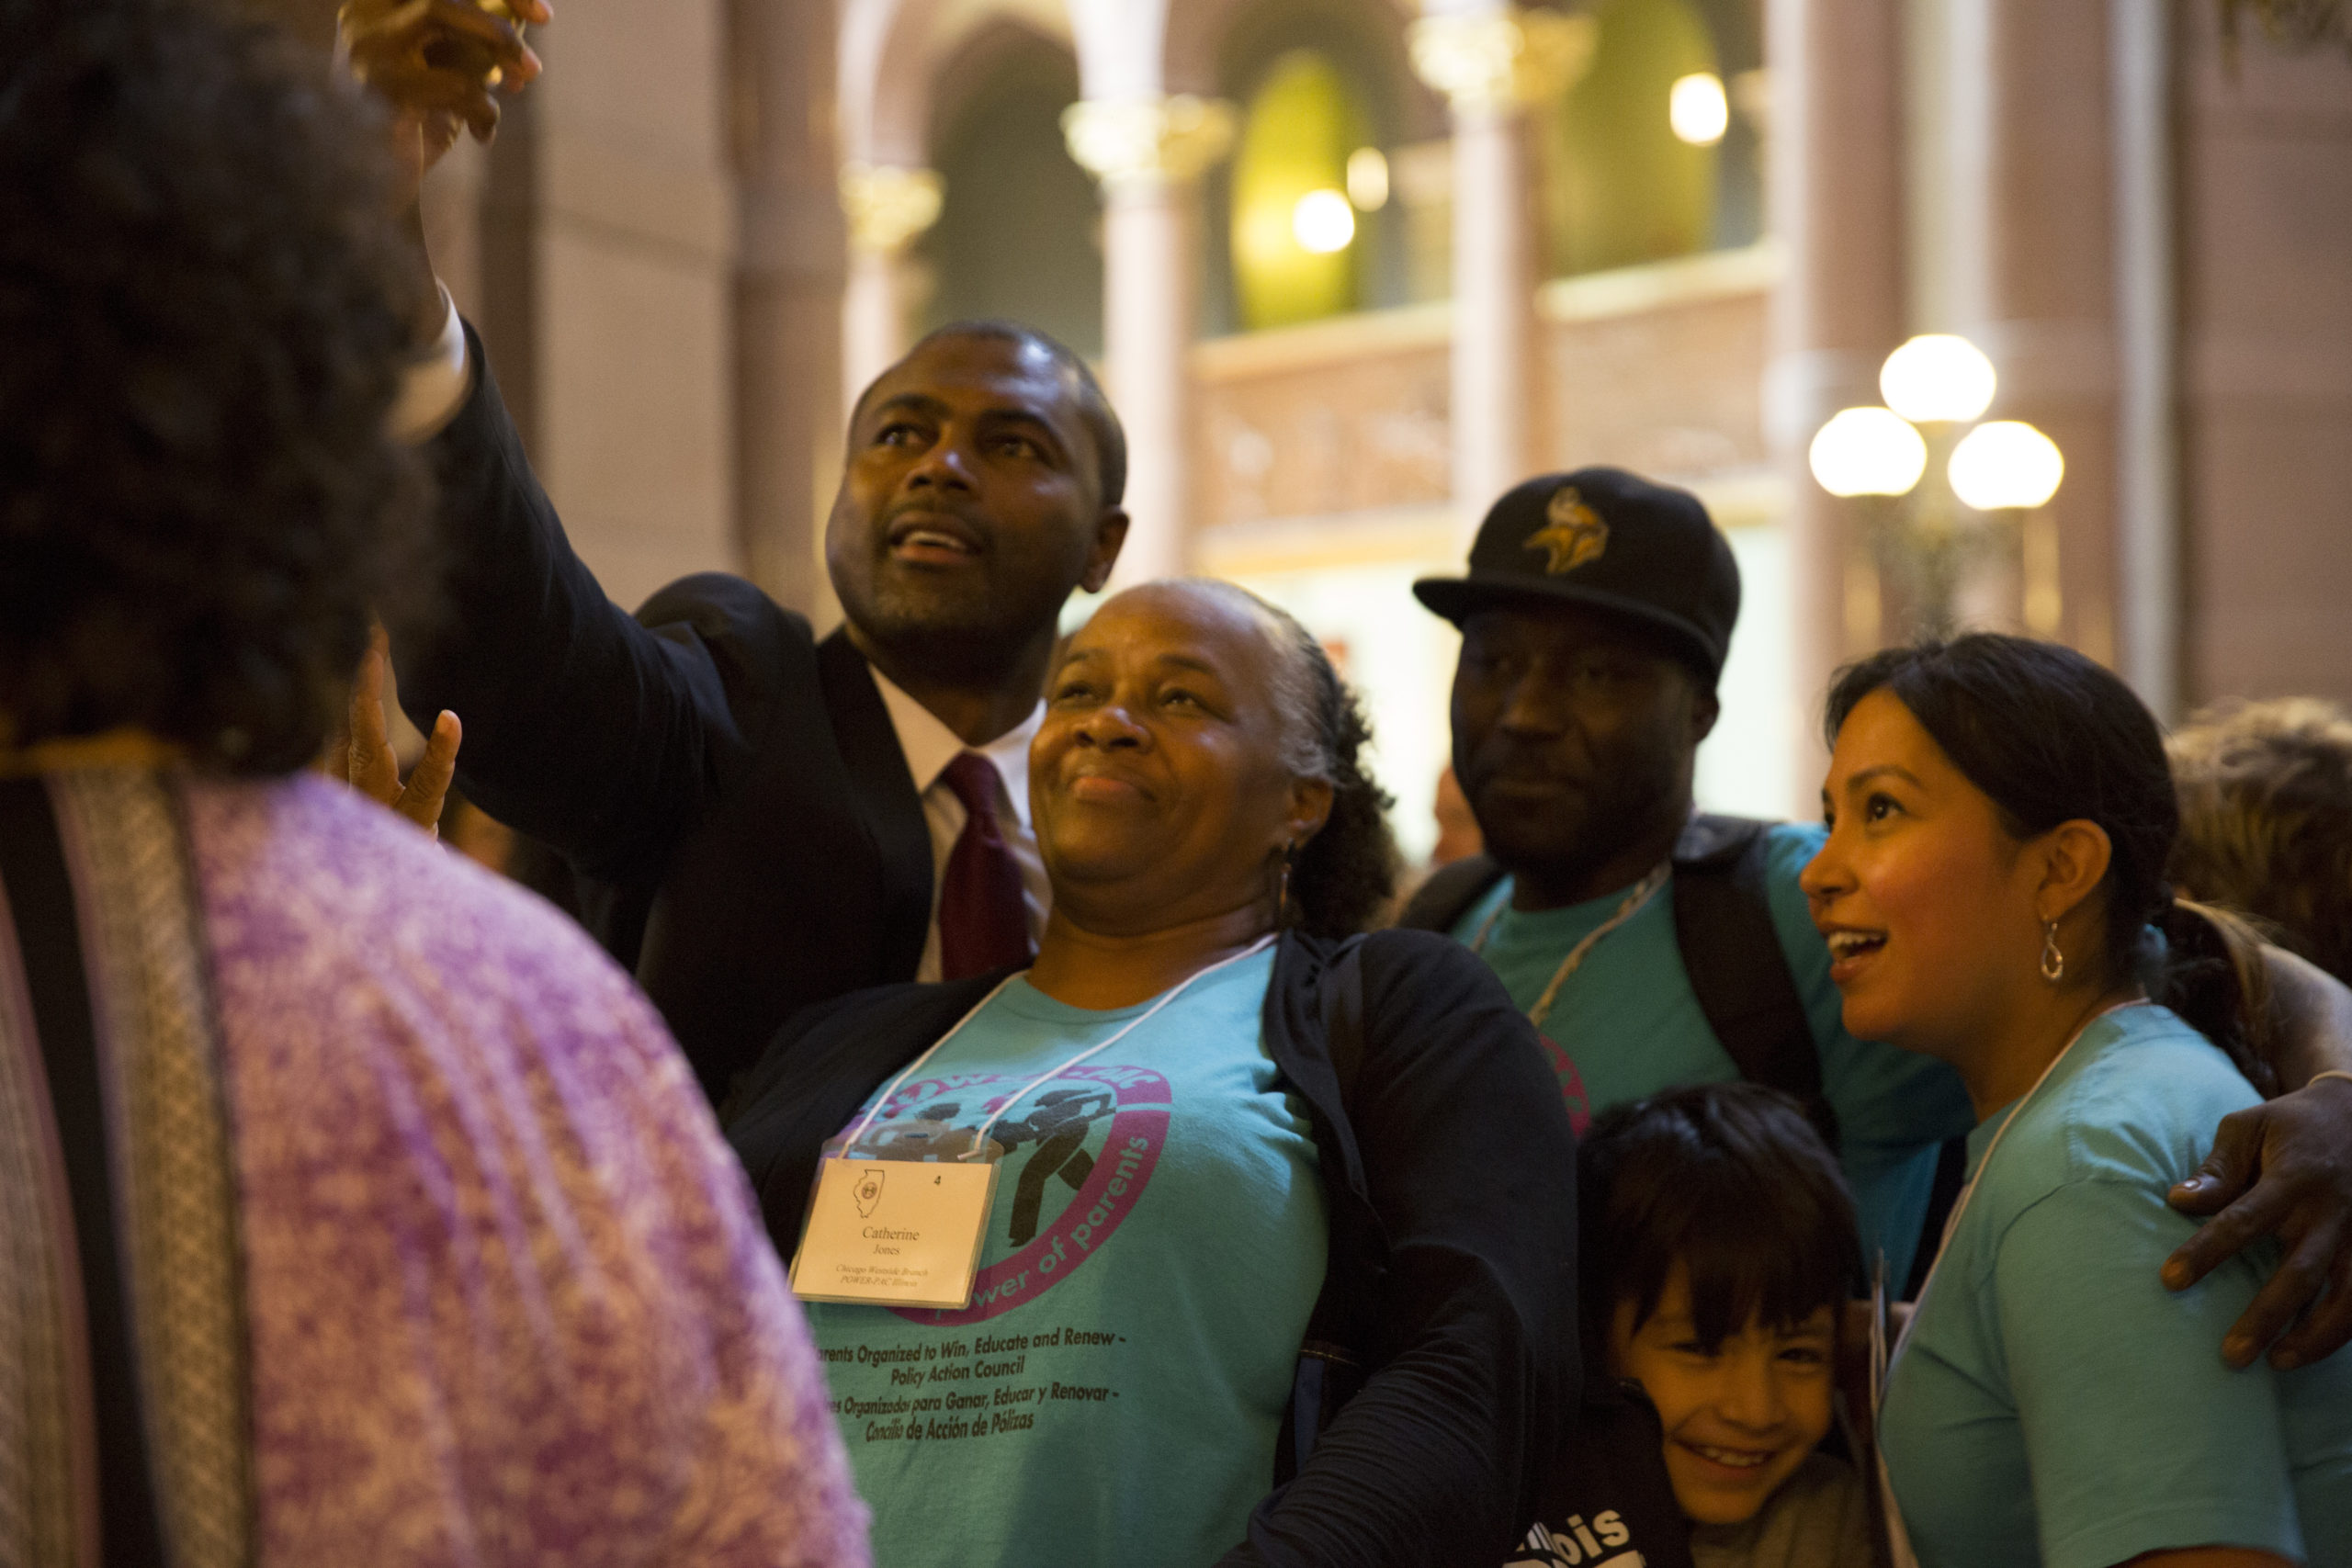 Parent leaders pose for a selfie with a legislator at the Illinois State Capitol